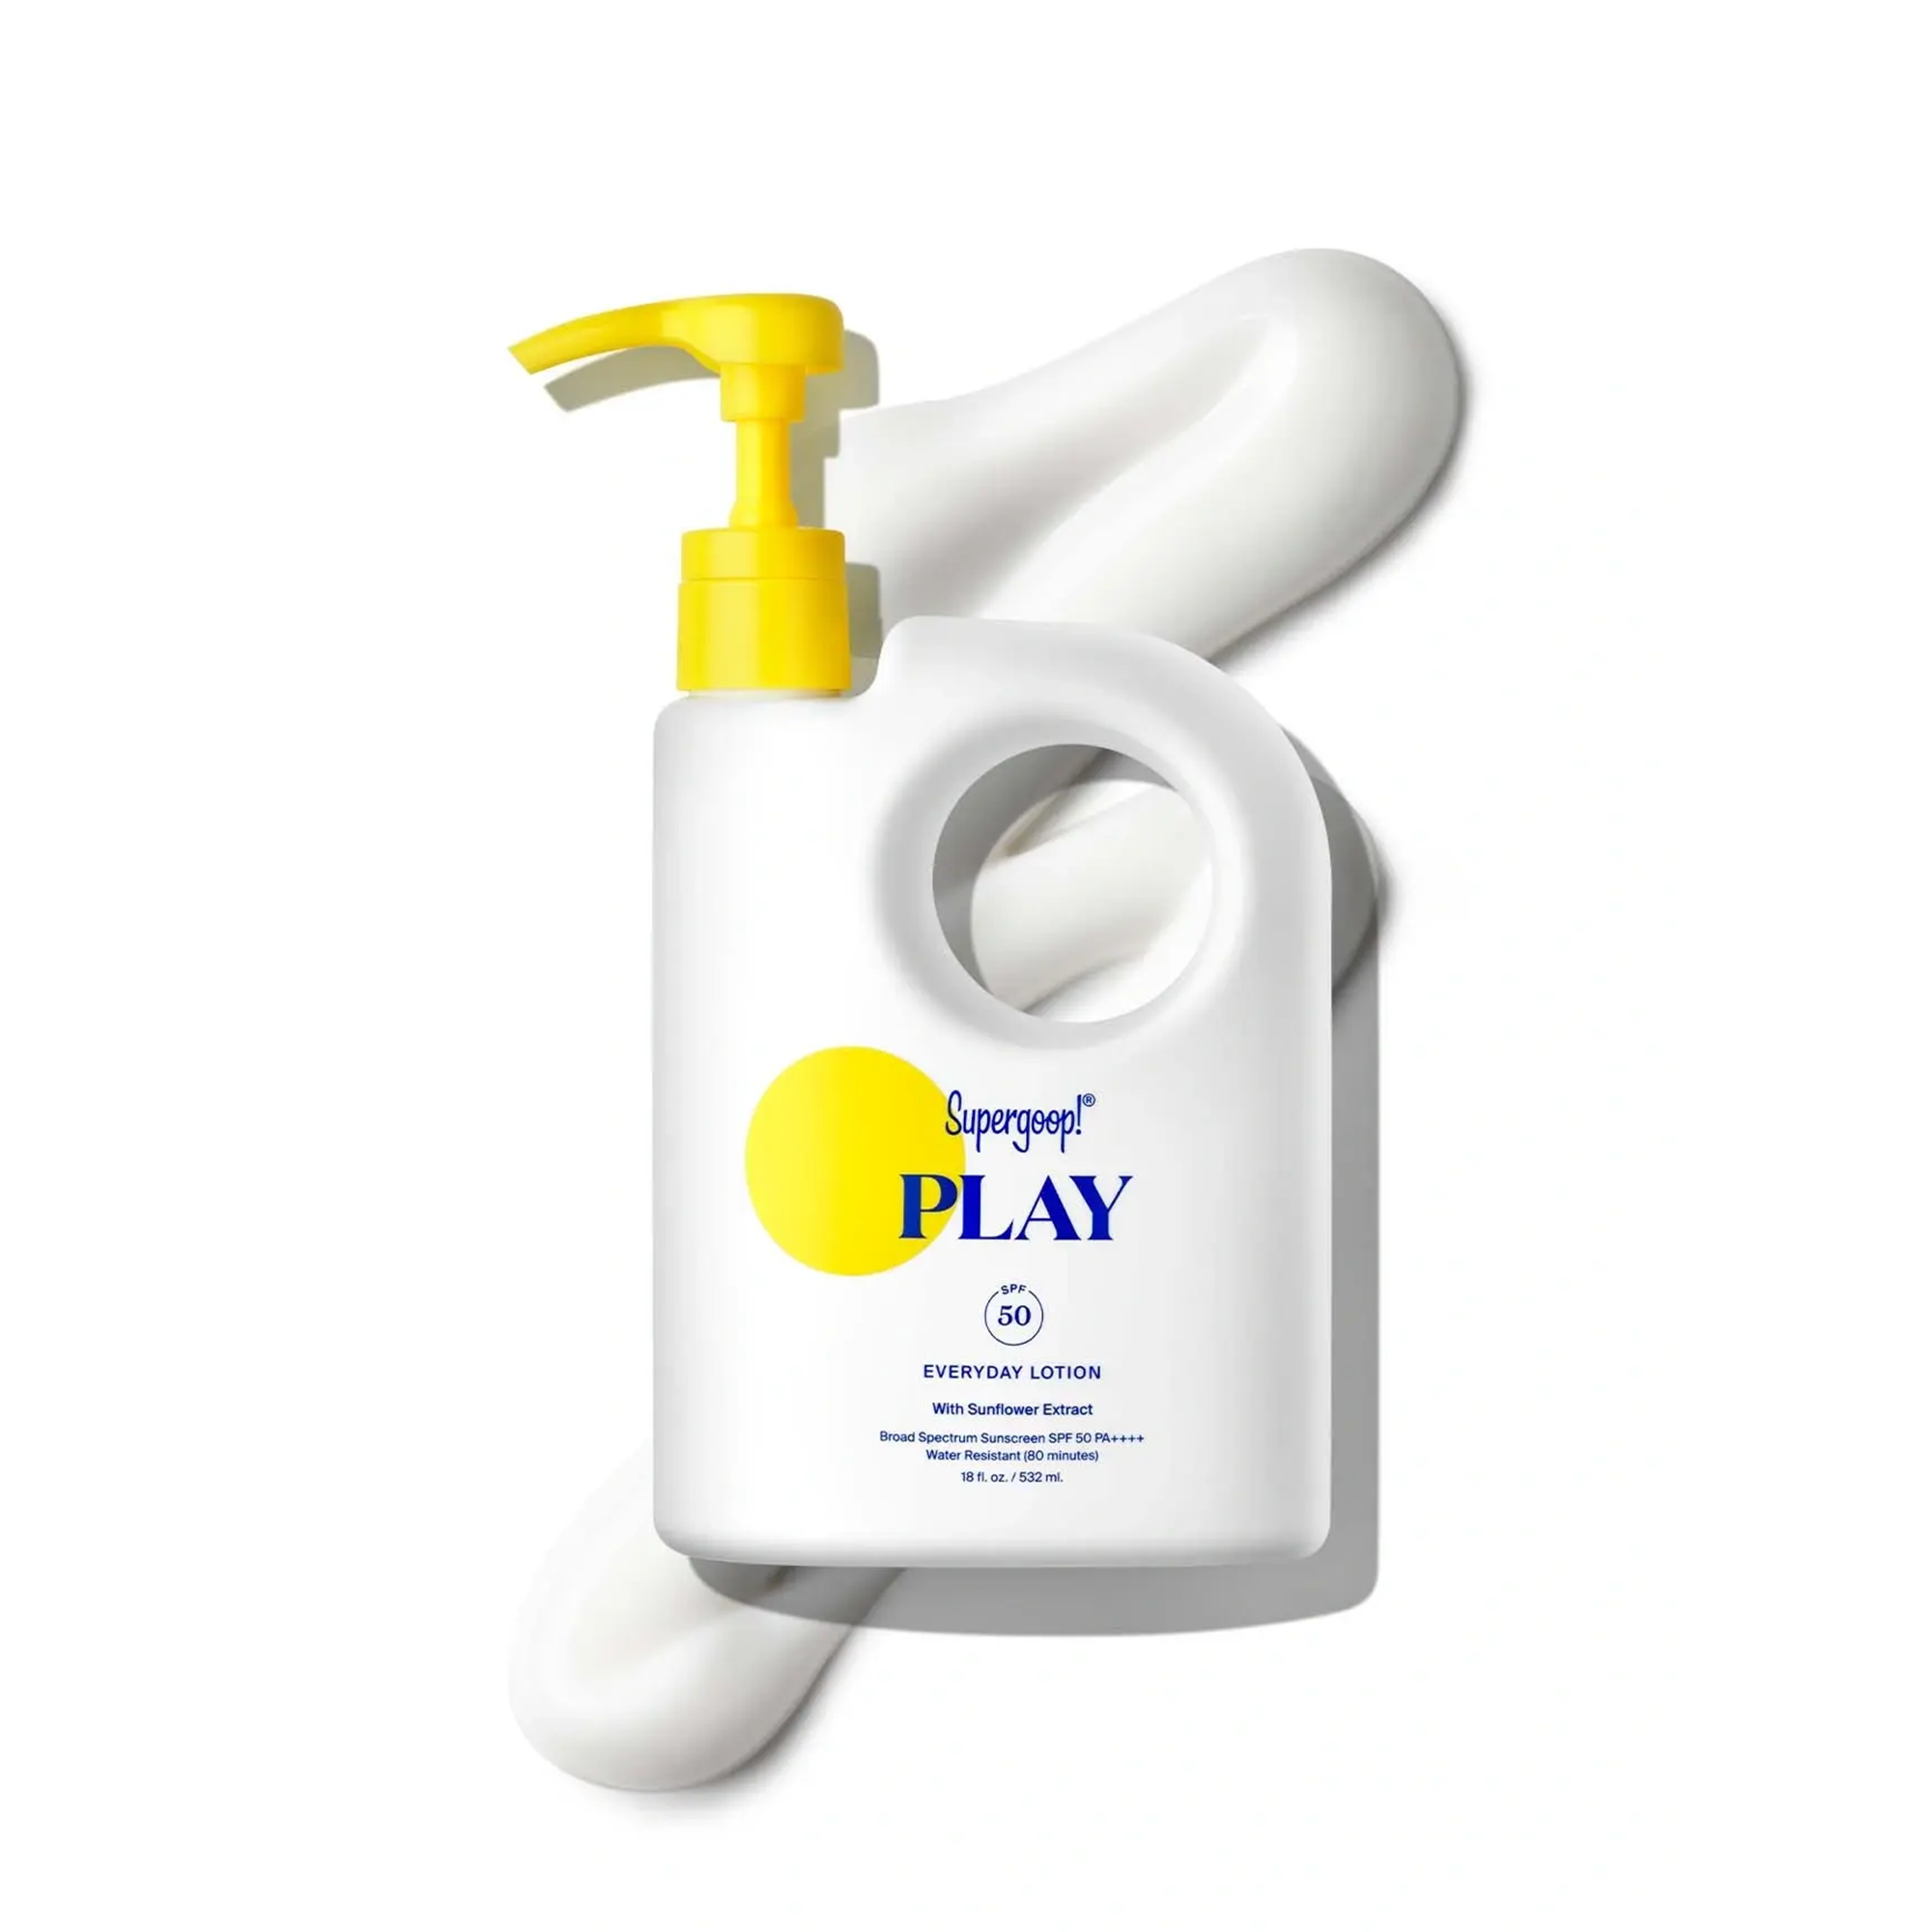 Supergoop! Play Everyday Lotion with Sunflower Extract Broad Spectrum Sunscreen - SPF 50 / 18OZ